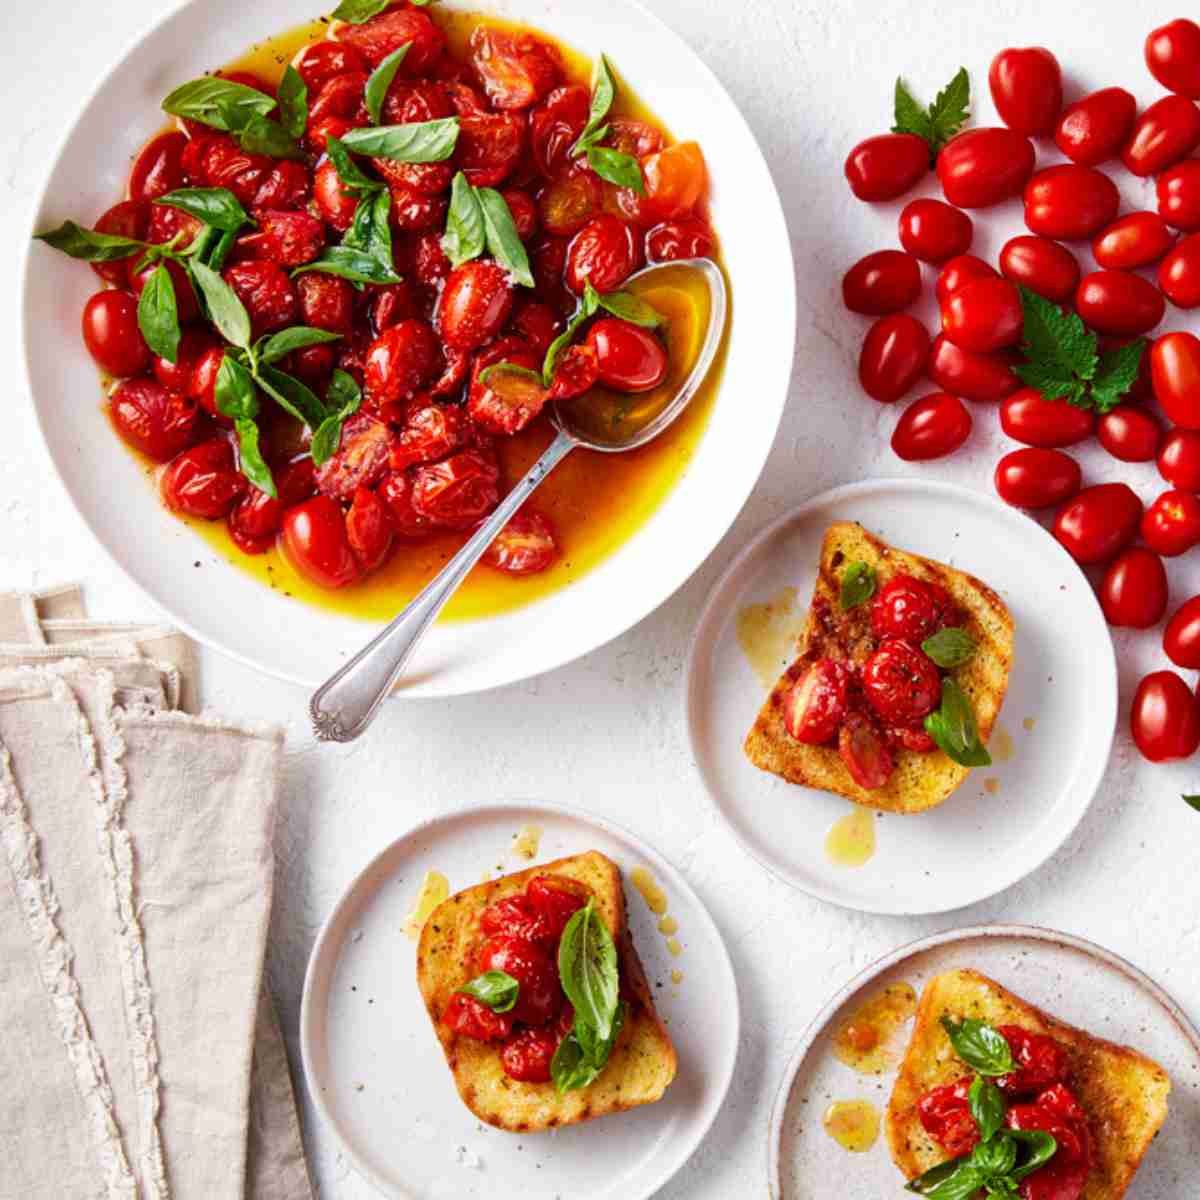 Three plates of garlic bread bruschetta topped with roasted solanato tomatoes and basil. Plus a plate of roasted tomatoes on the side.